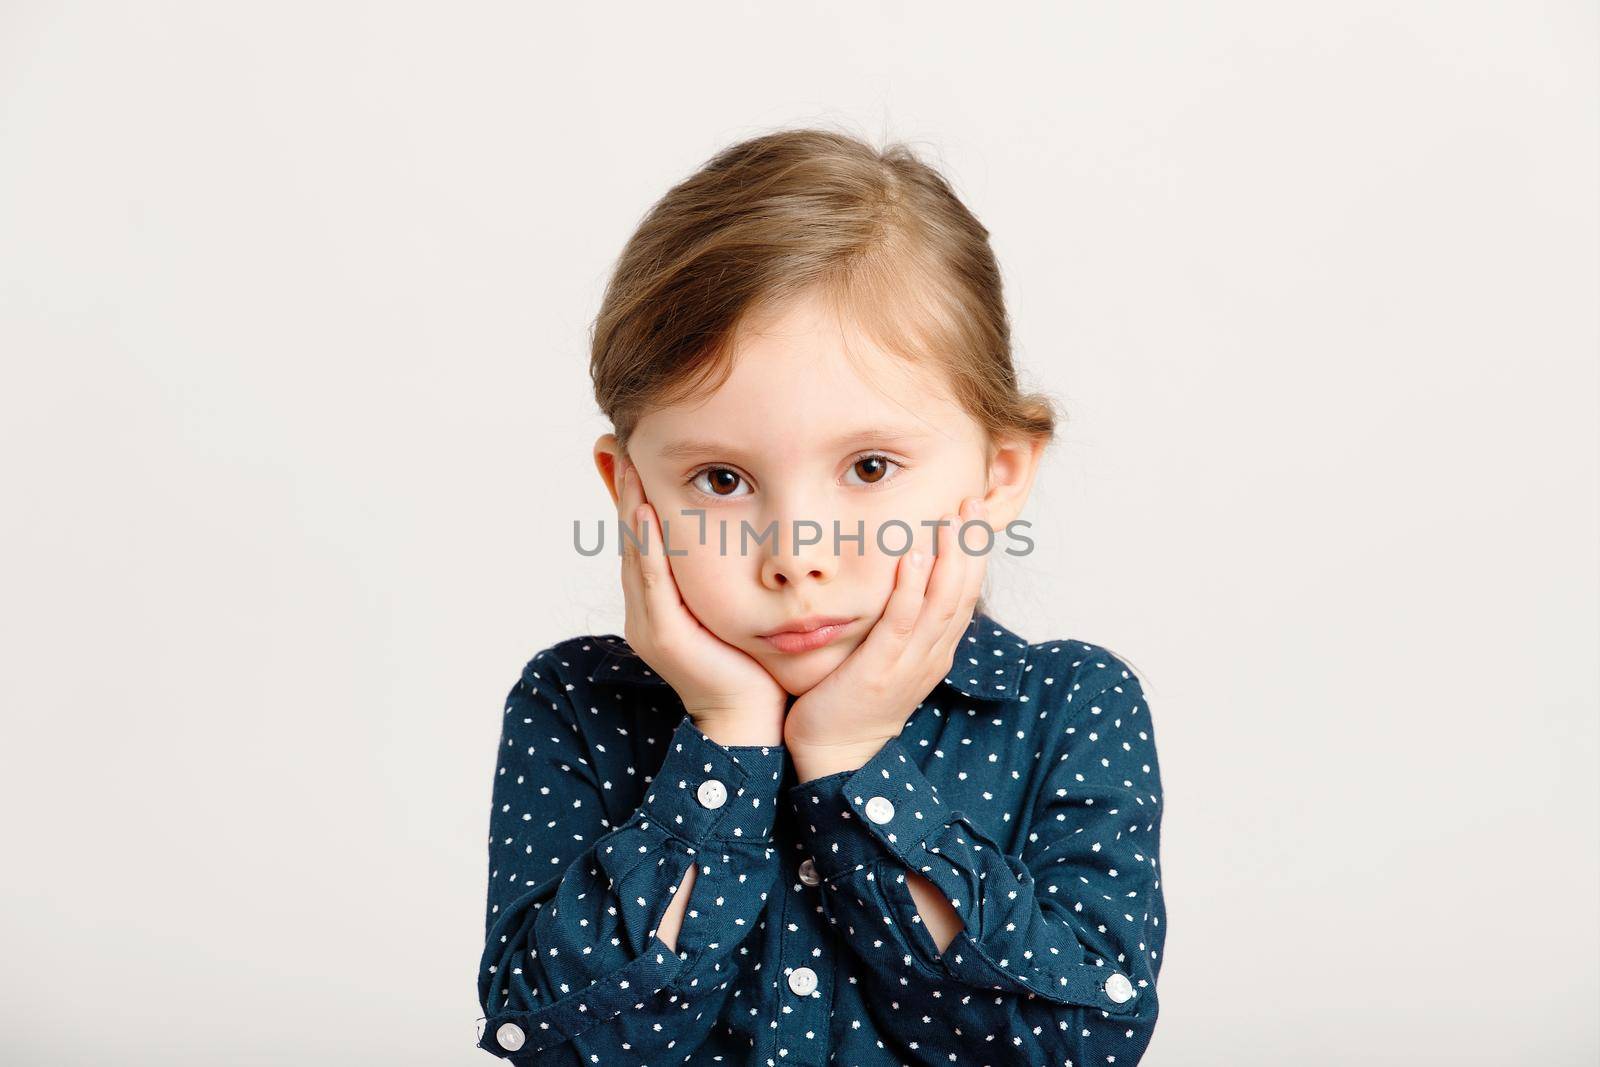 Portrait of an offended, gloomy, angry little girl 4-6 years old wearing a blue dress with polka dots. Cute sad kid girl on a white background